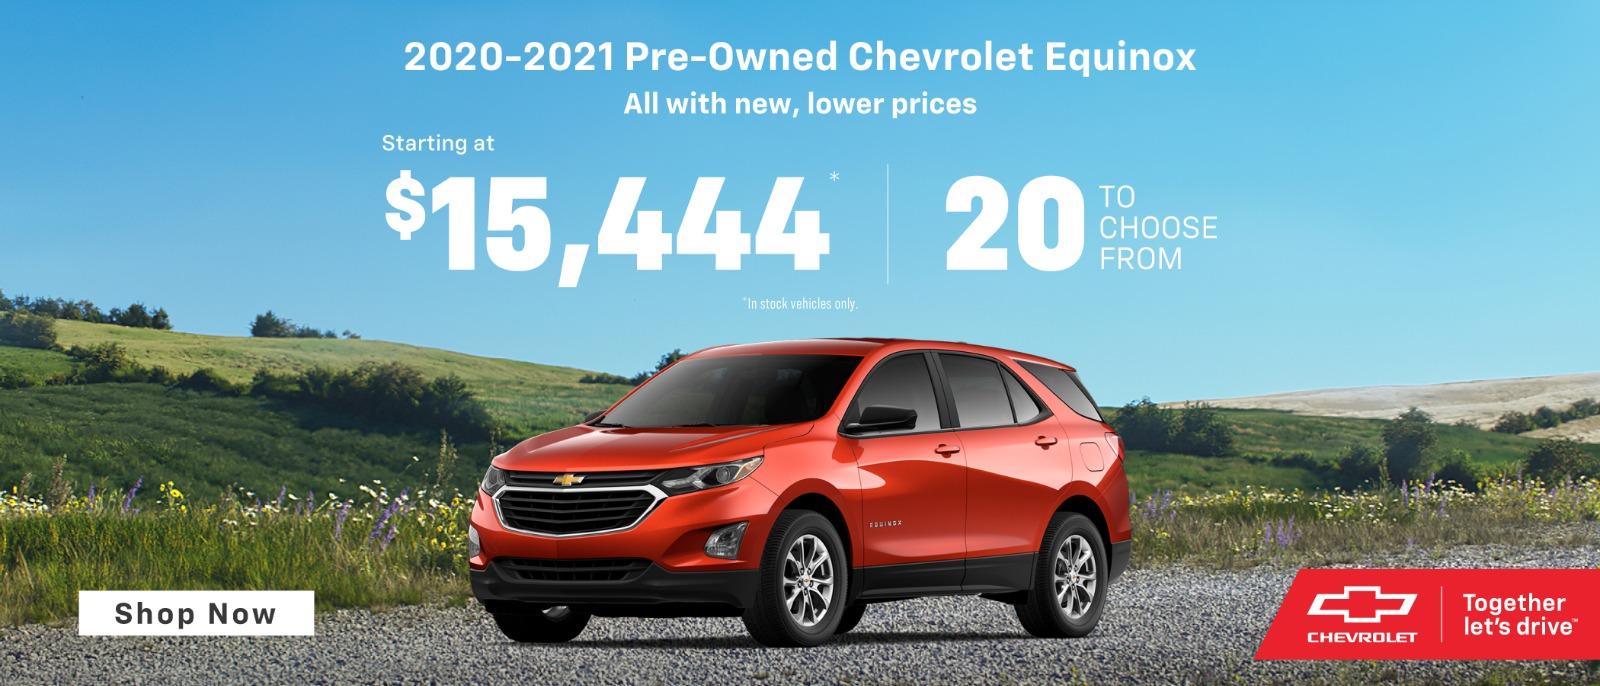 2020-2021 pre owned Chevy Equinox  starting at $15,444